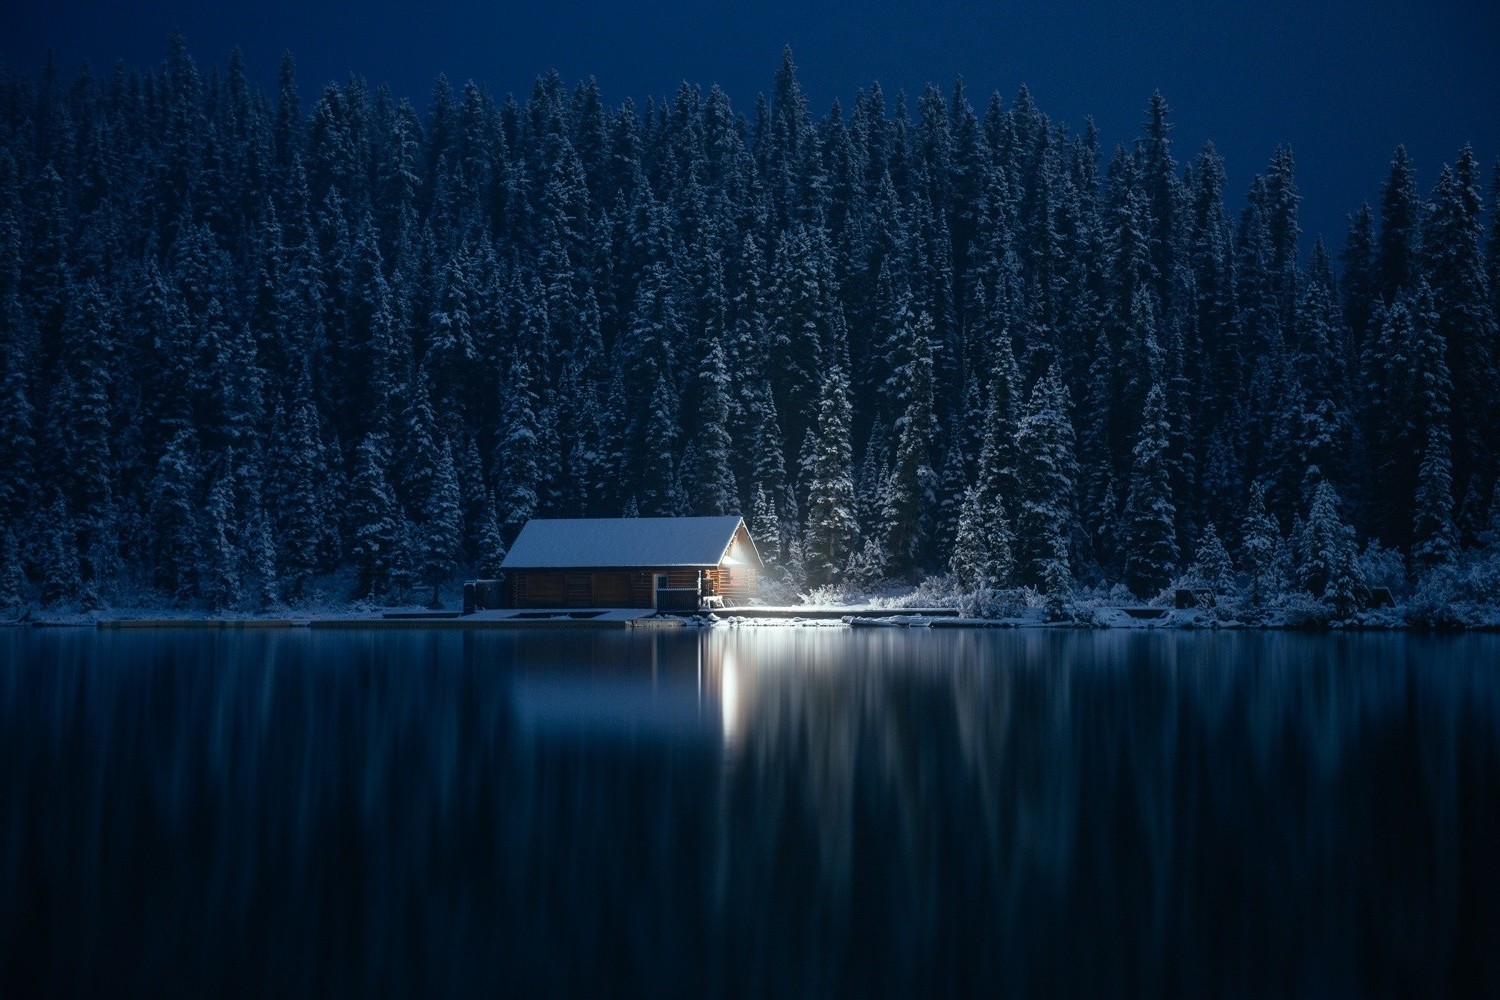 Wallpaper, sunlight, landscape, lights, forest, night, lake, nature, reflection, snow, winter, photography, ice, cold, evening, morning, moonlight, atmosphere, cabin, pine trees, dusk, light, dawn, darkness, 1500x1000 px, atmospheric phenomenon